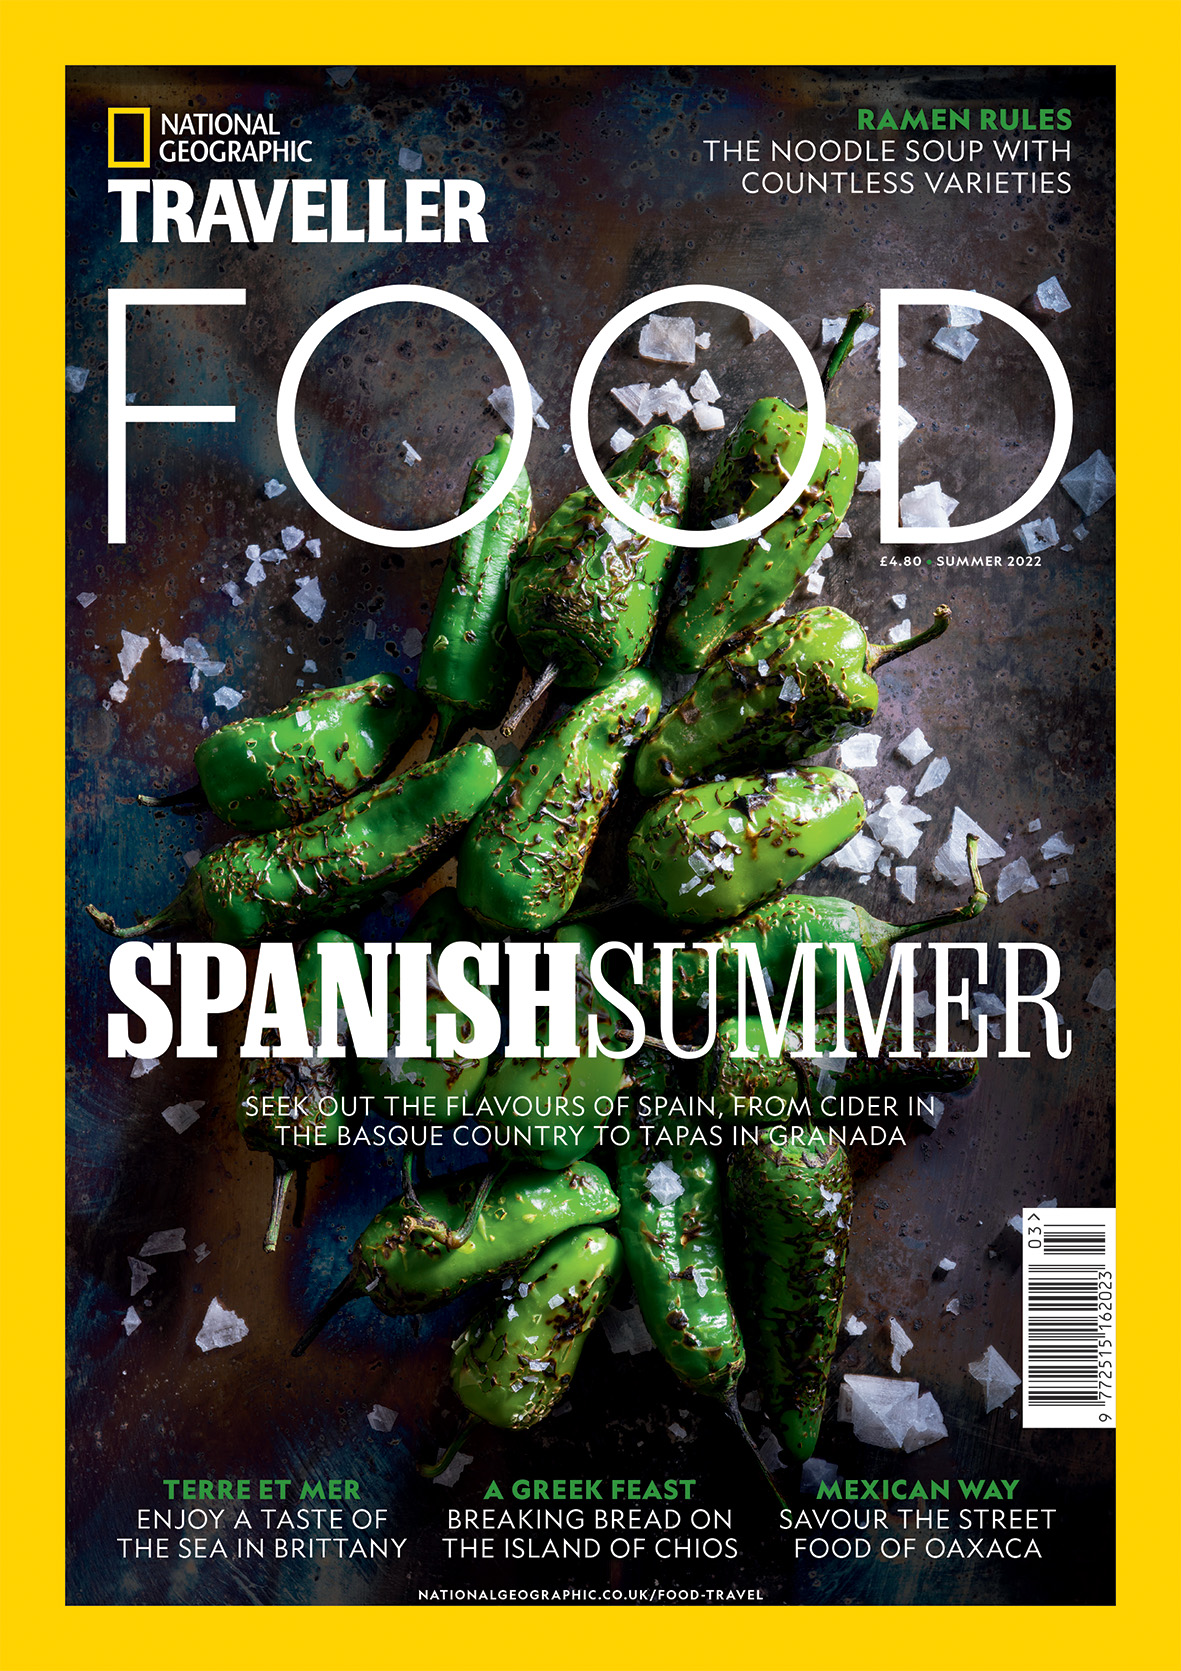 For Immediate Release Rediscover Spain with Food by National Geographic Traveler (UK) [nationalgeographic.co.uk/food-travel|https://www.nationalgeographic.co.uk/food-travel]